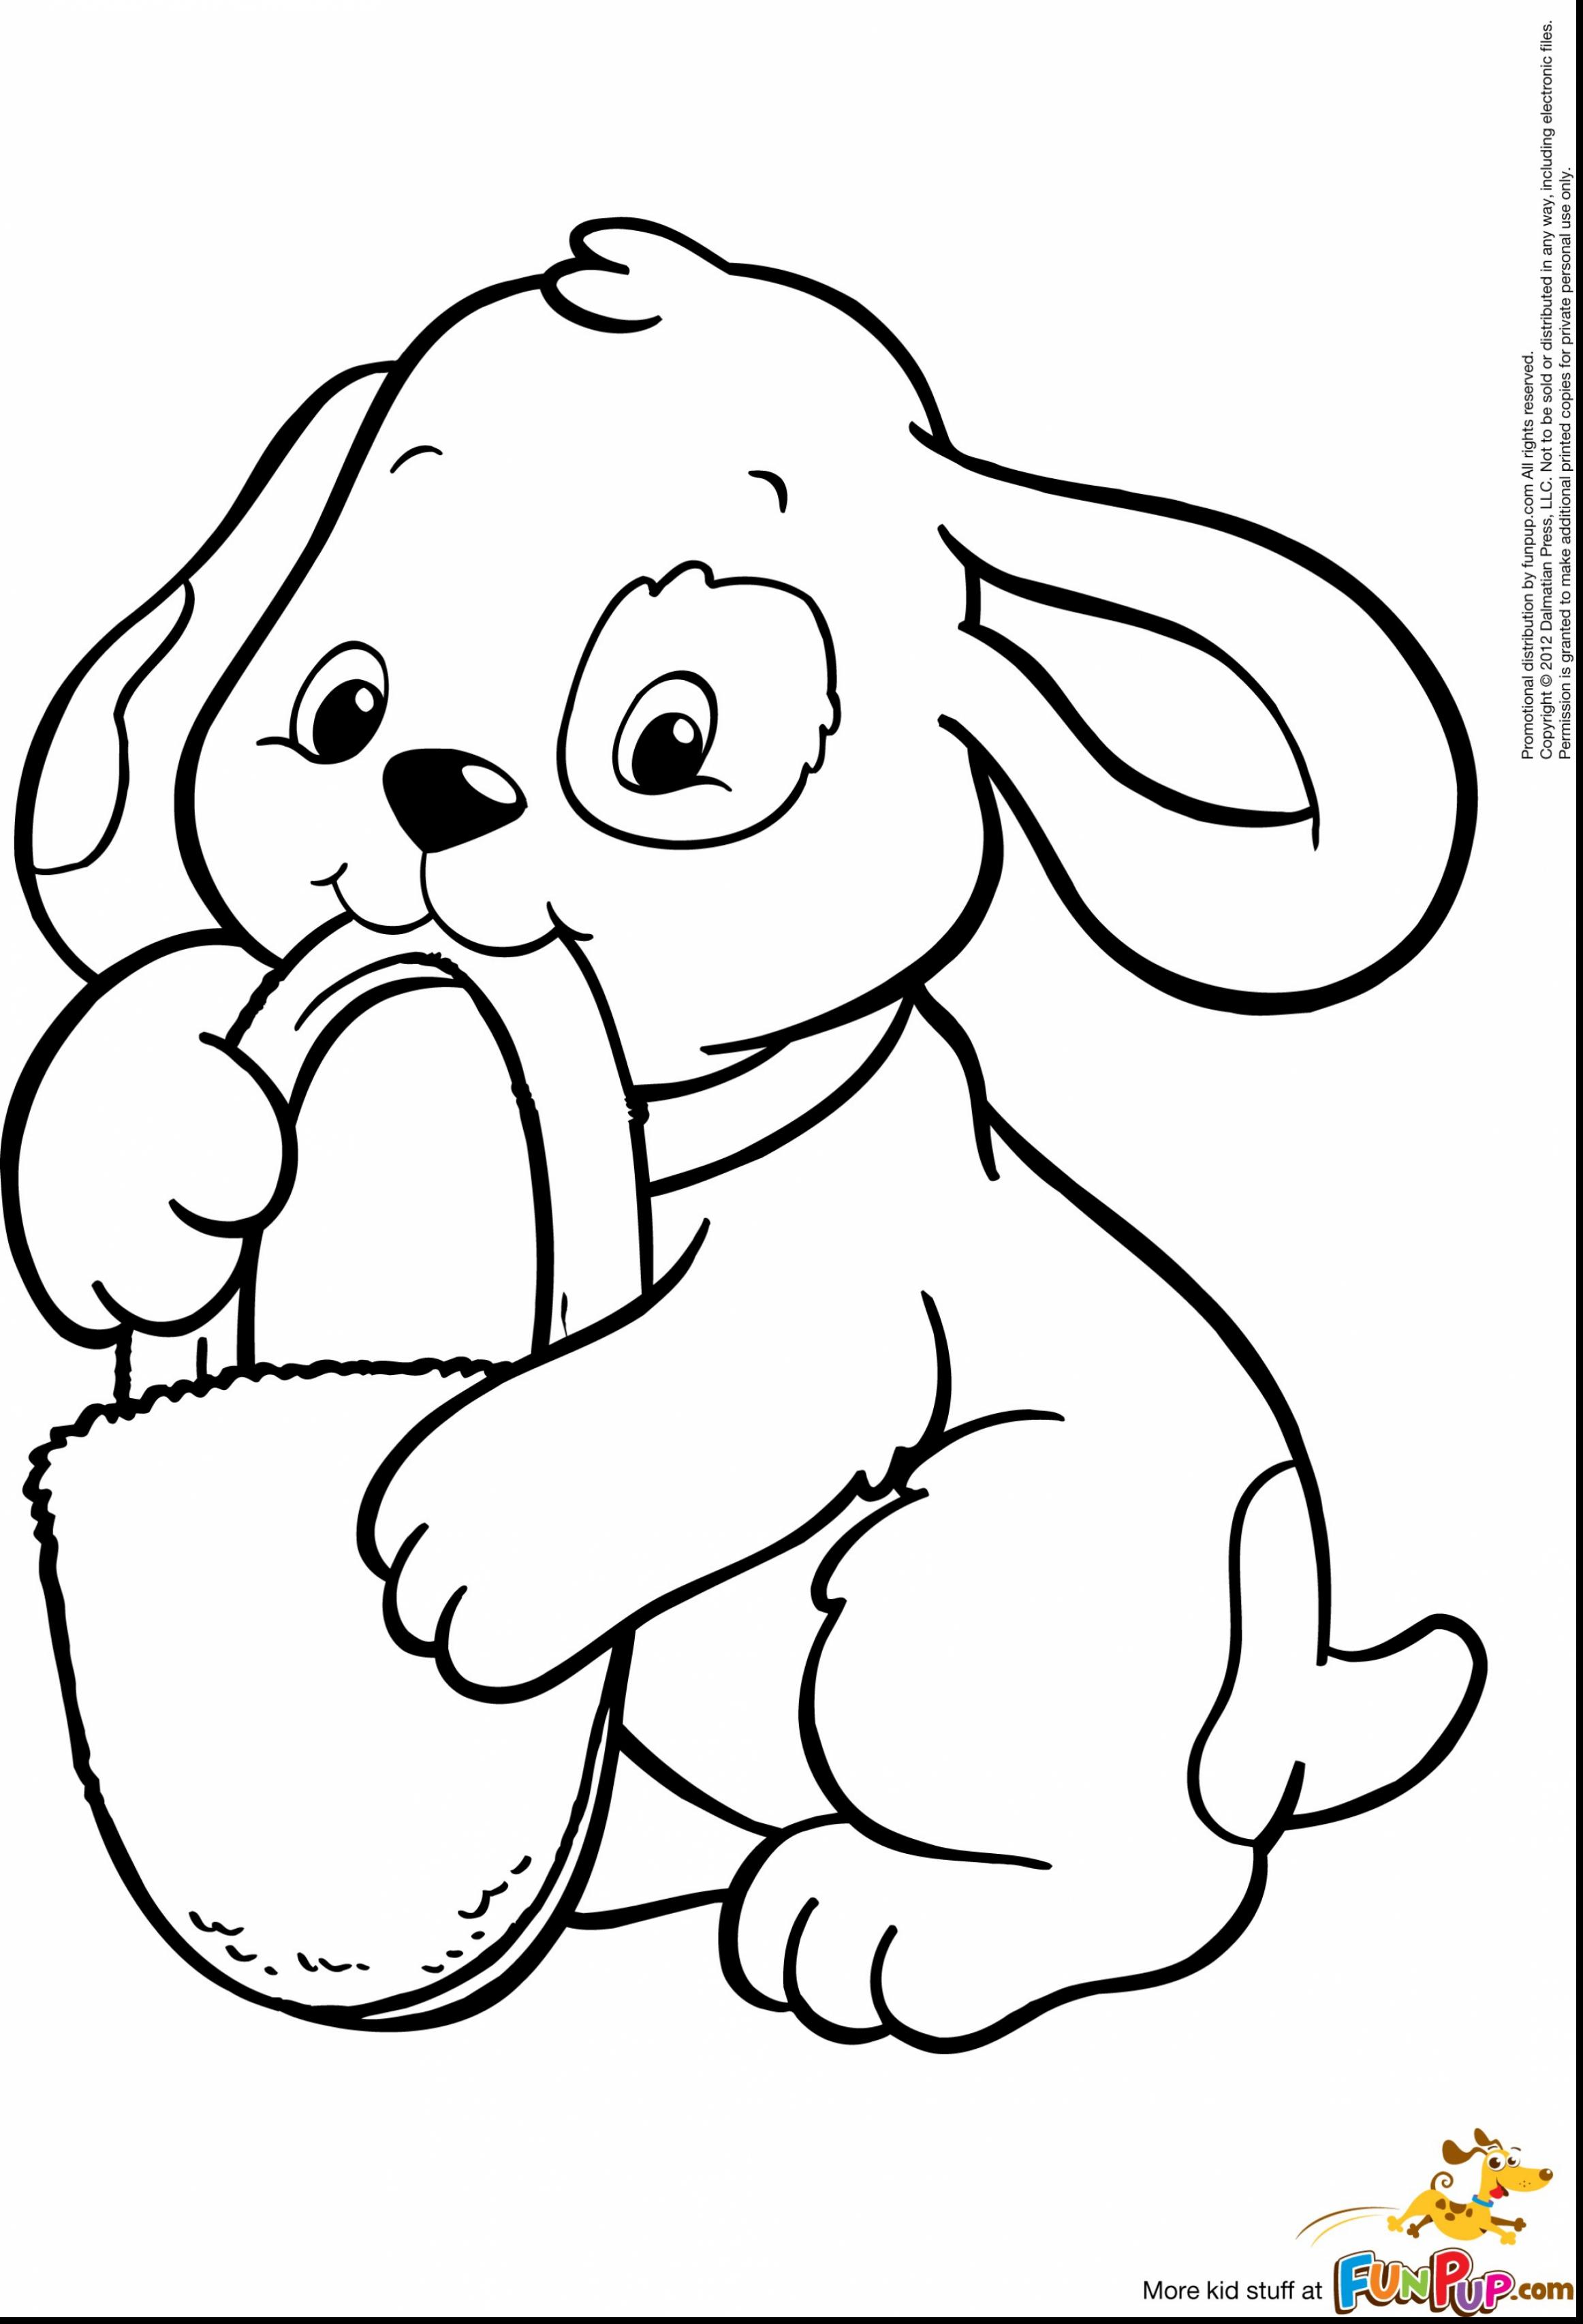 Dog Coloring Pages To Print At GetColorings Free Printable Colorings Pages To Print And Color